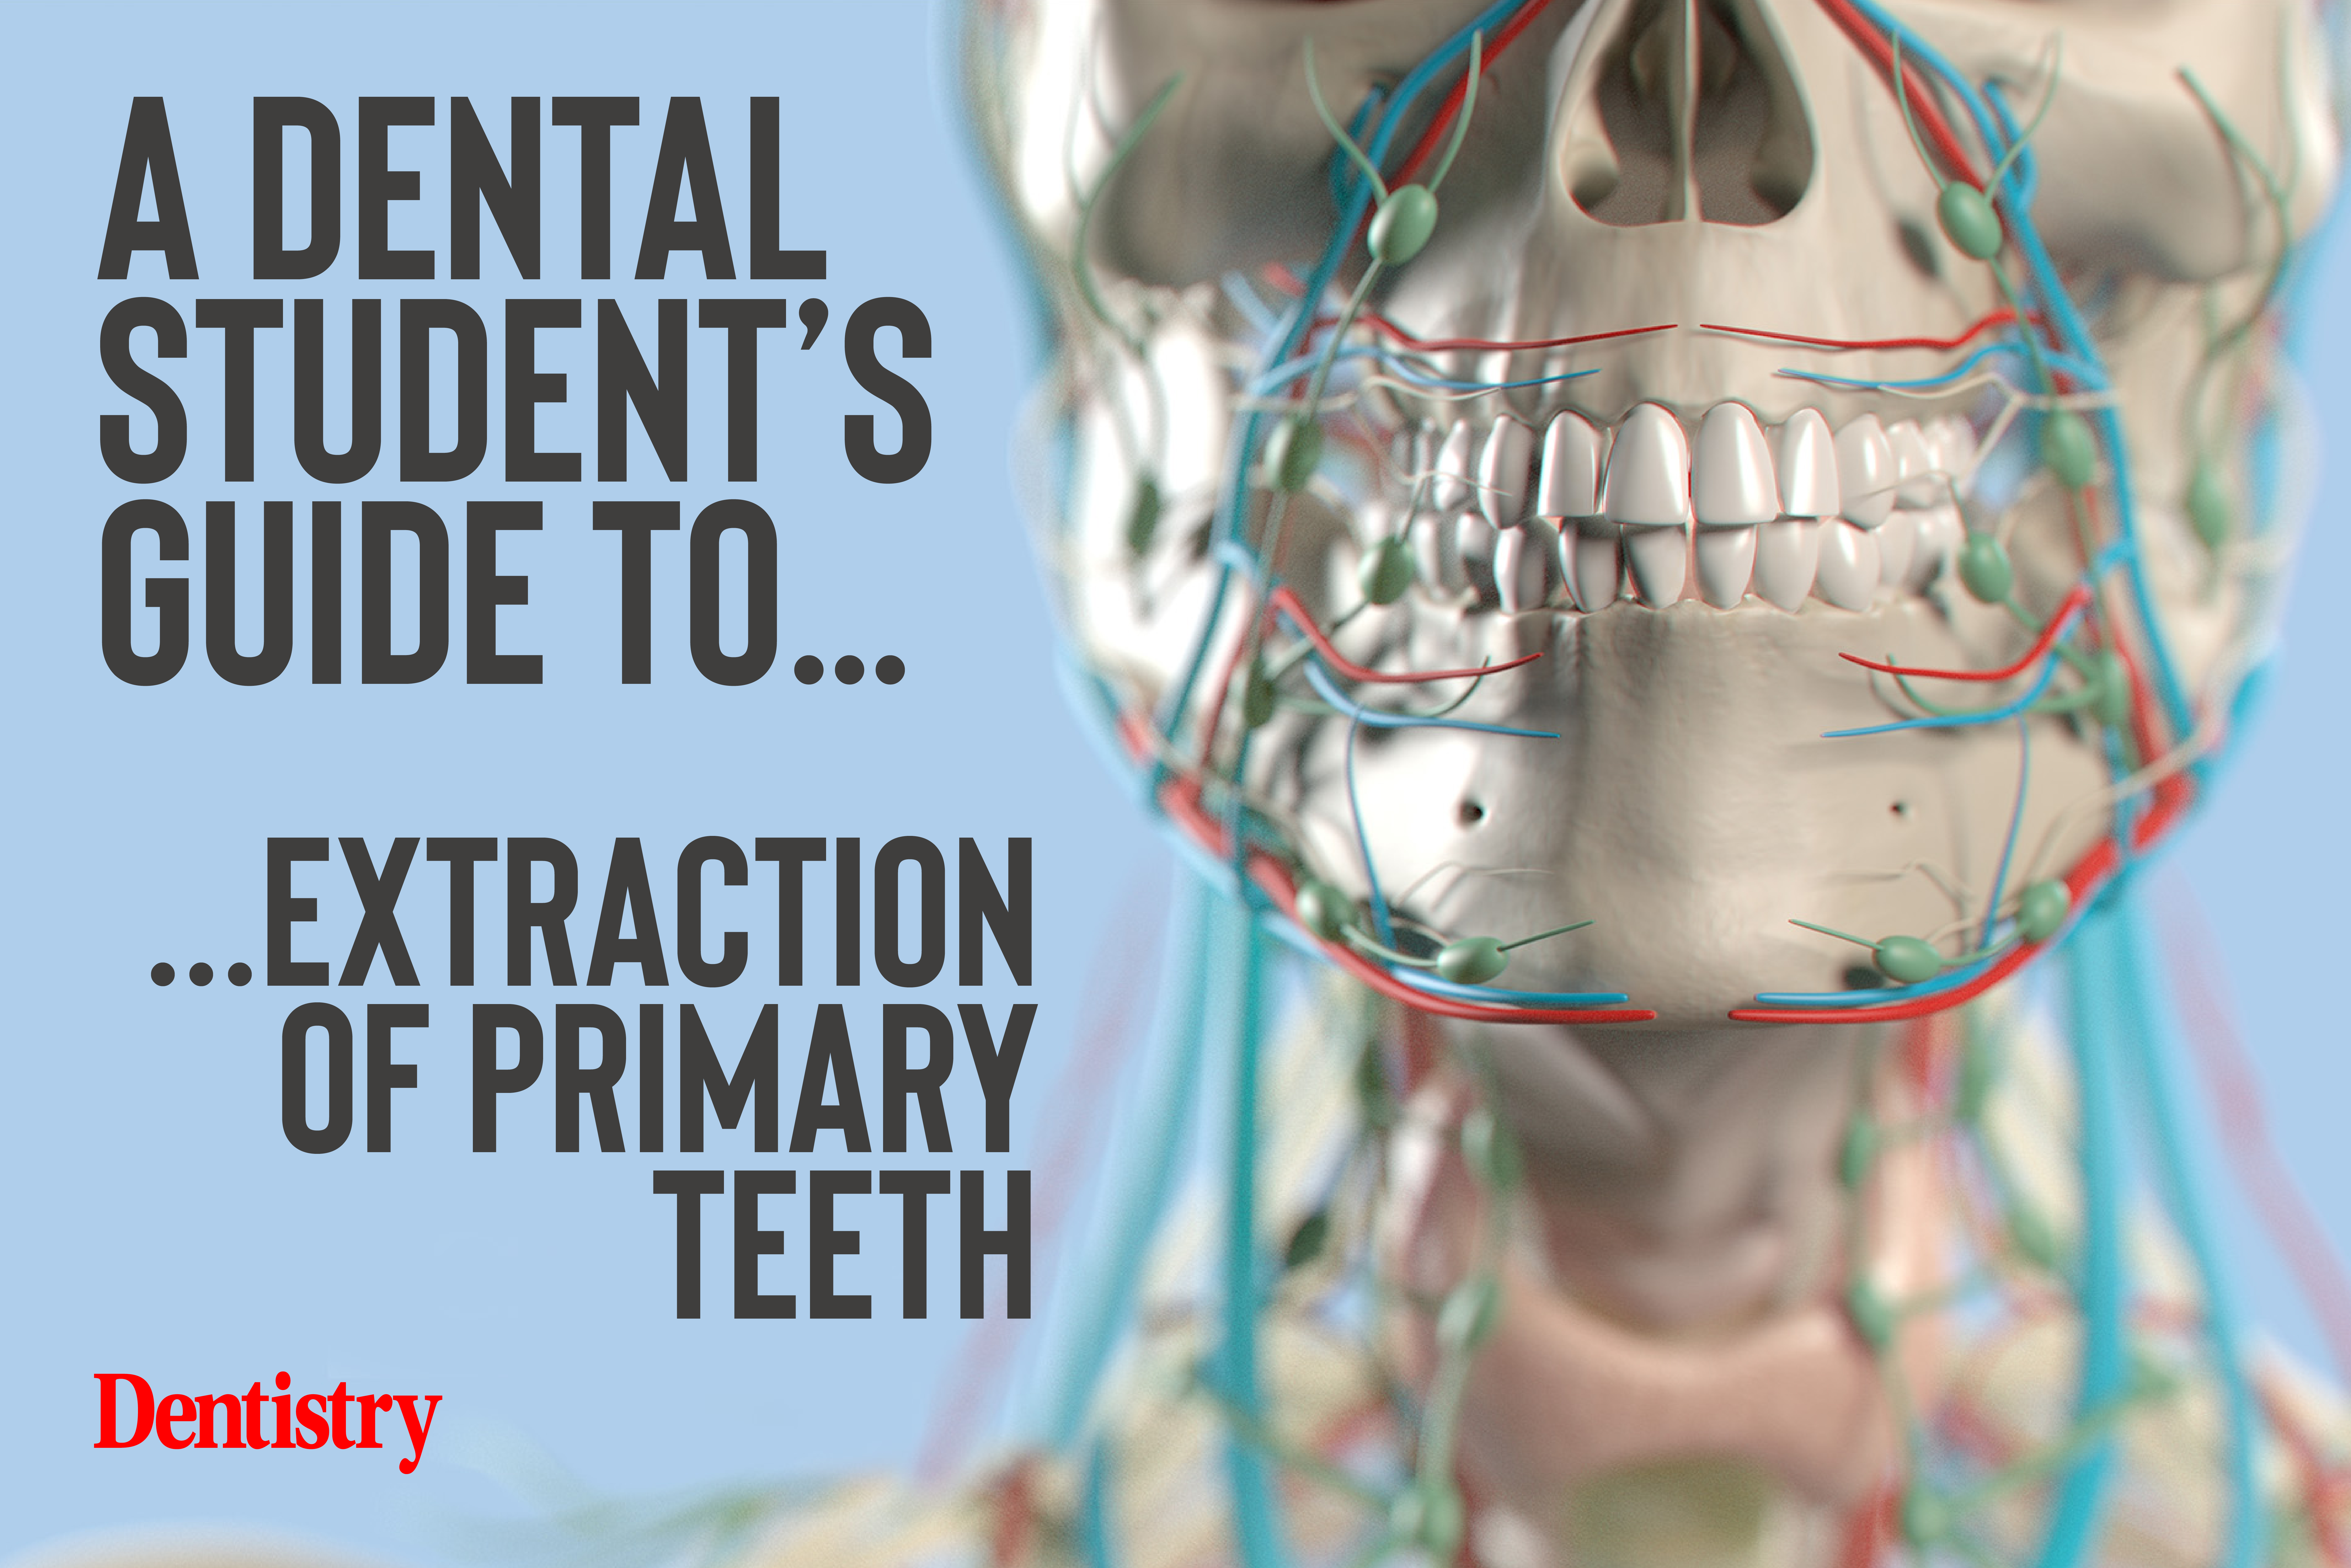 Hannah Hook breaks down the guidance around the extraction of primary teeth, including balancing and compensating extractions.